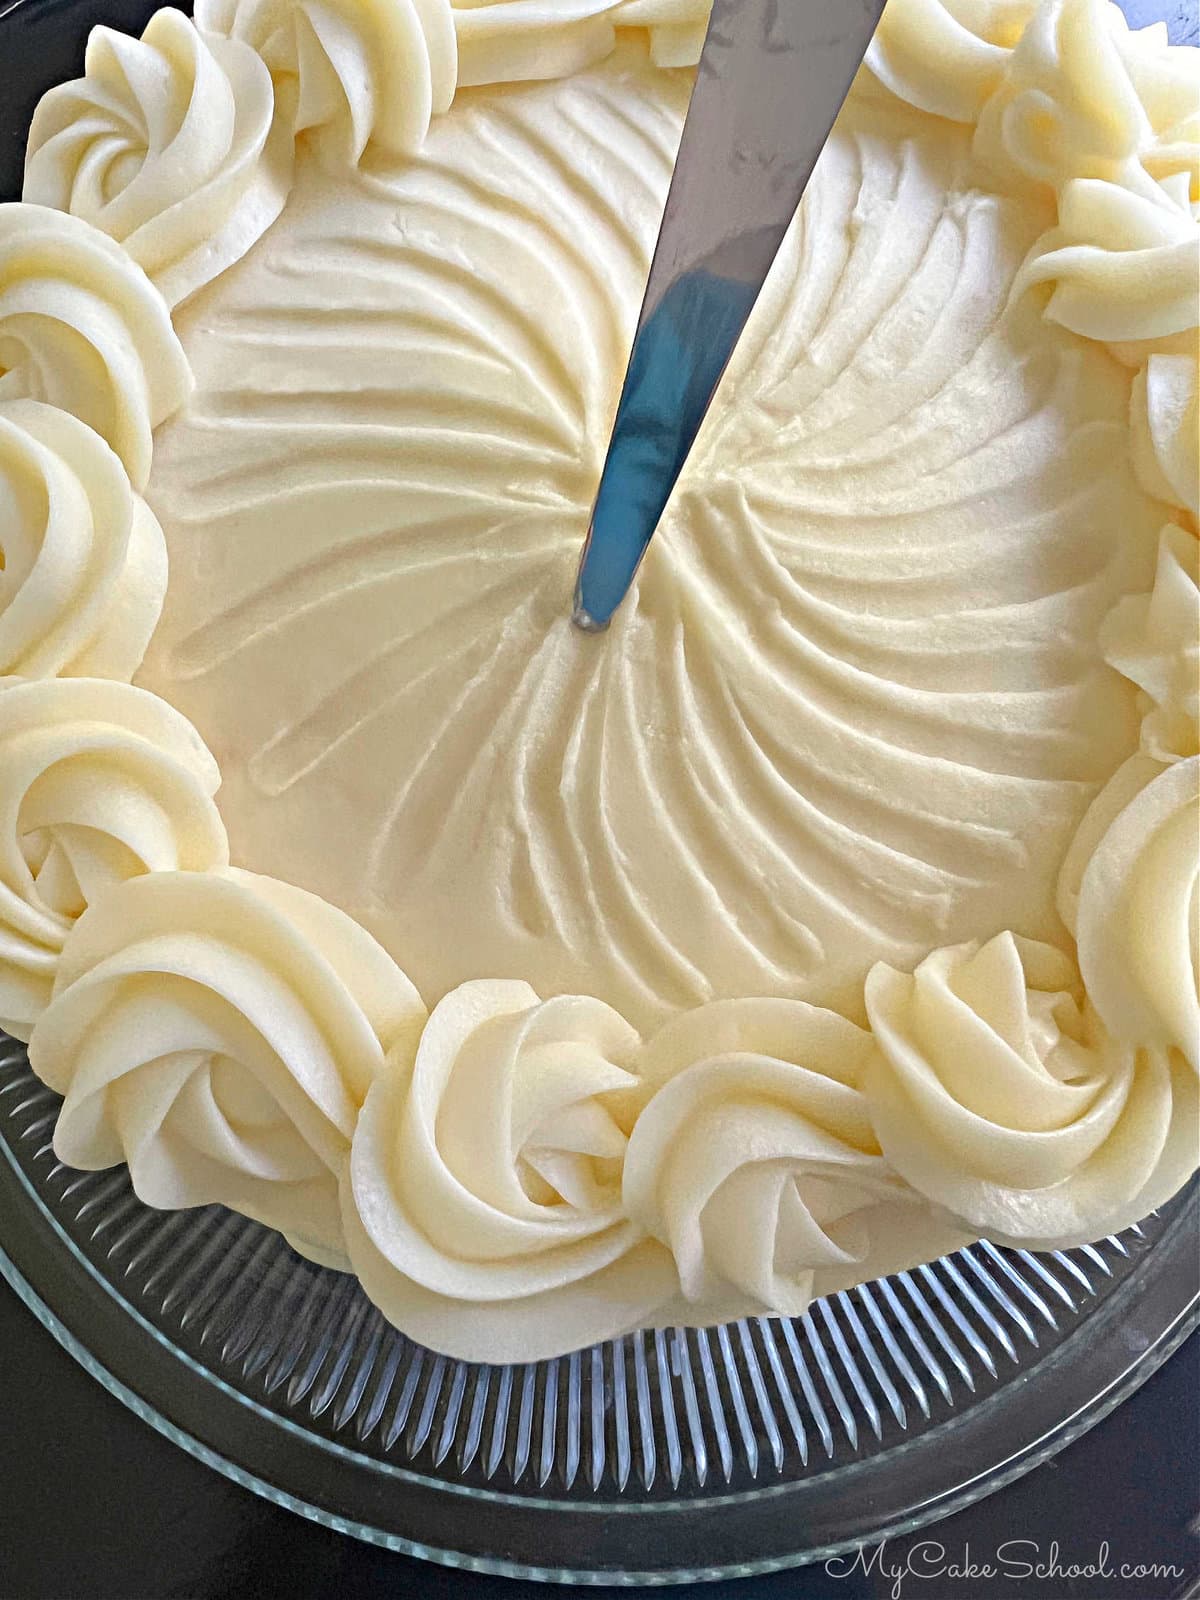 Adding design to top of the frosted cake with a small, tapered spatula